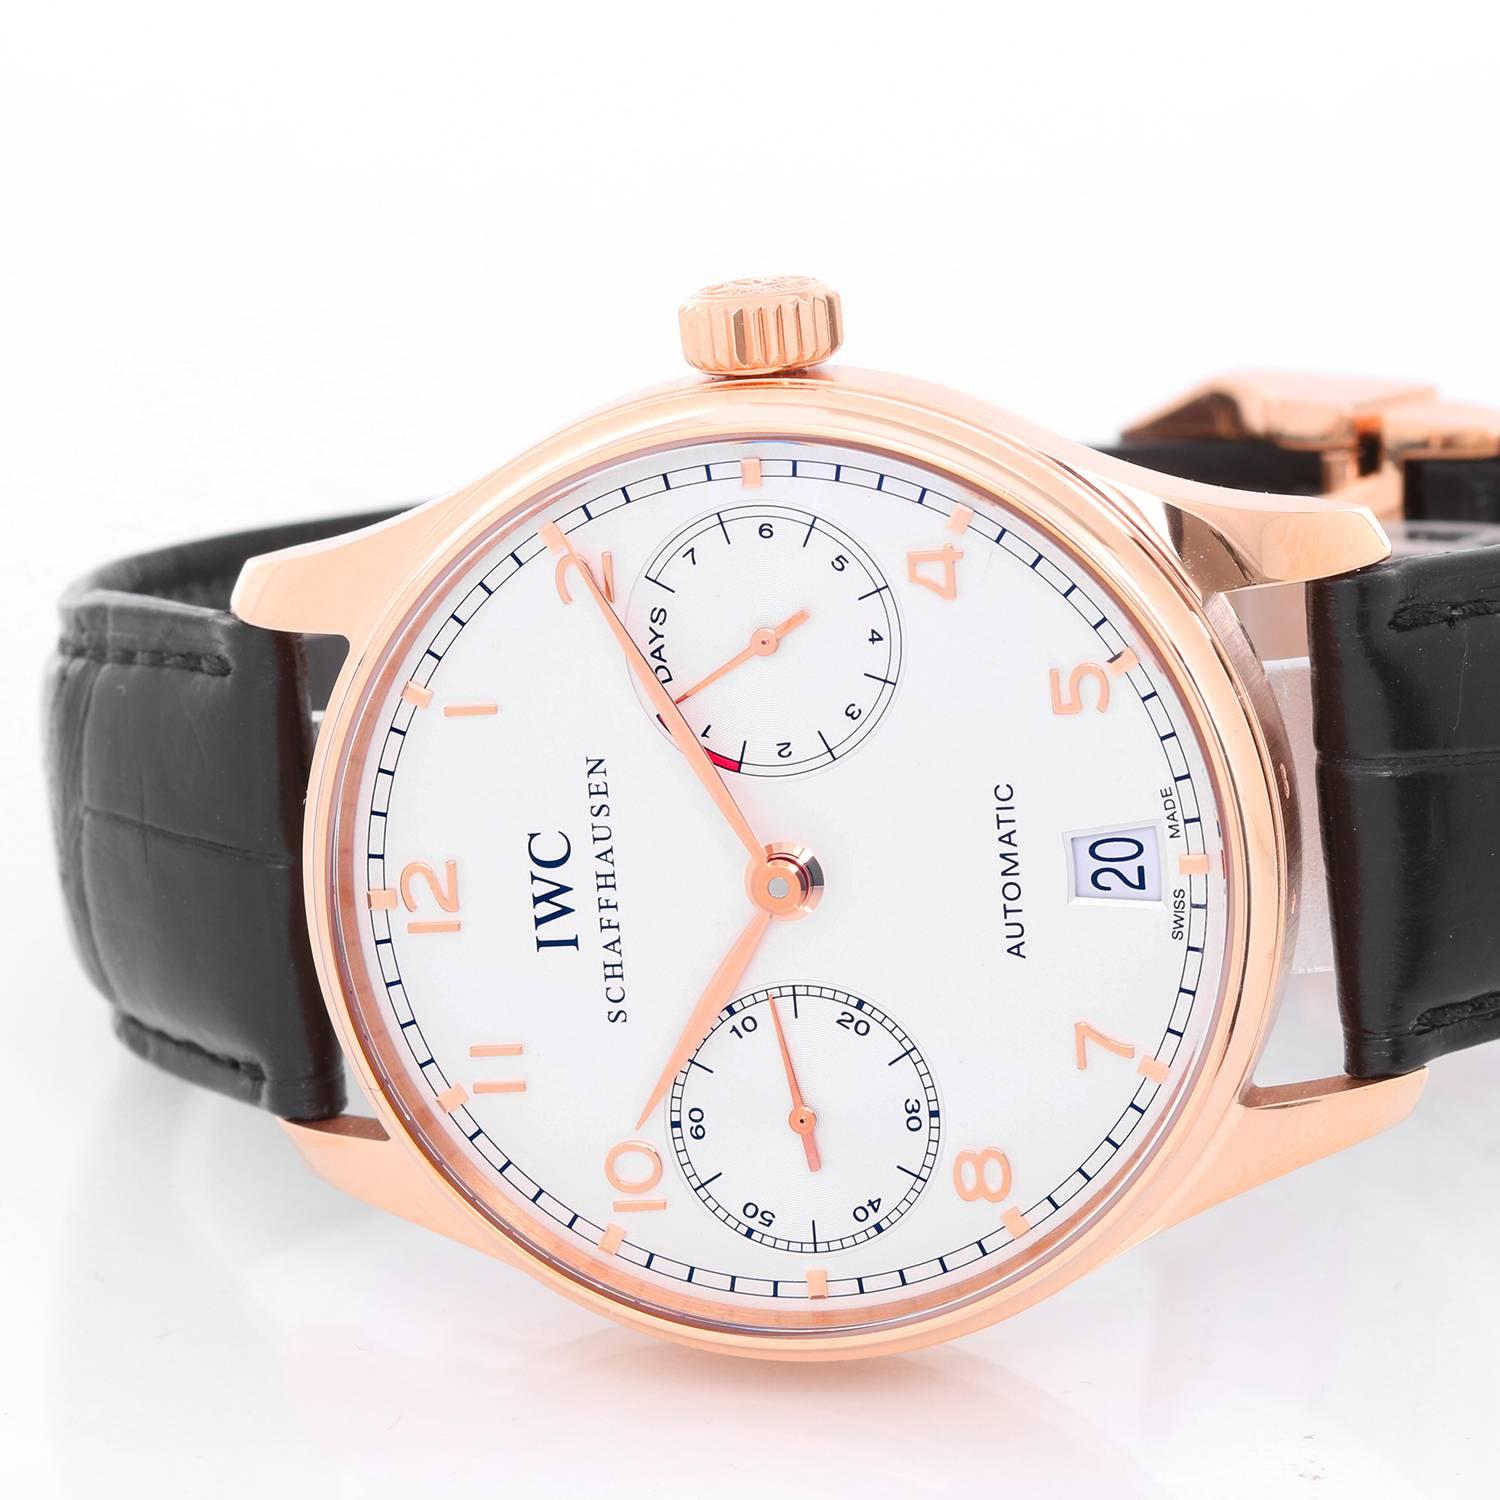 IWC Portuguese 7 Day Power Reserve 18K Rose Gold Men's Watch Ref 5001 - 01 -  Automatic winding. 18K Rose Gold (43 mm). Silvered dial with raised gold Arabic numerals. Black leather strap with 18K Rose Gold IWC deployant clasp. Pre-owned with IWC